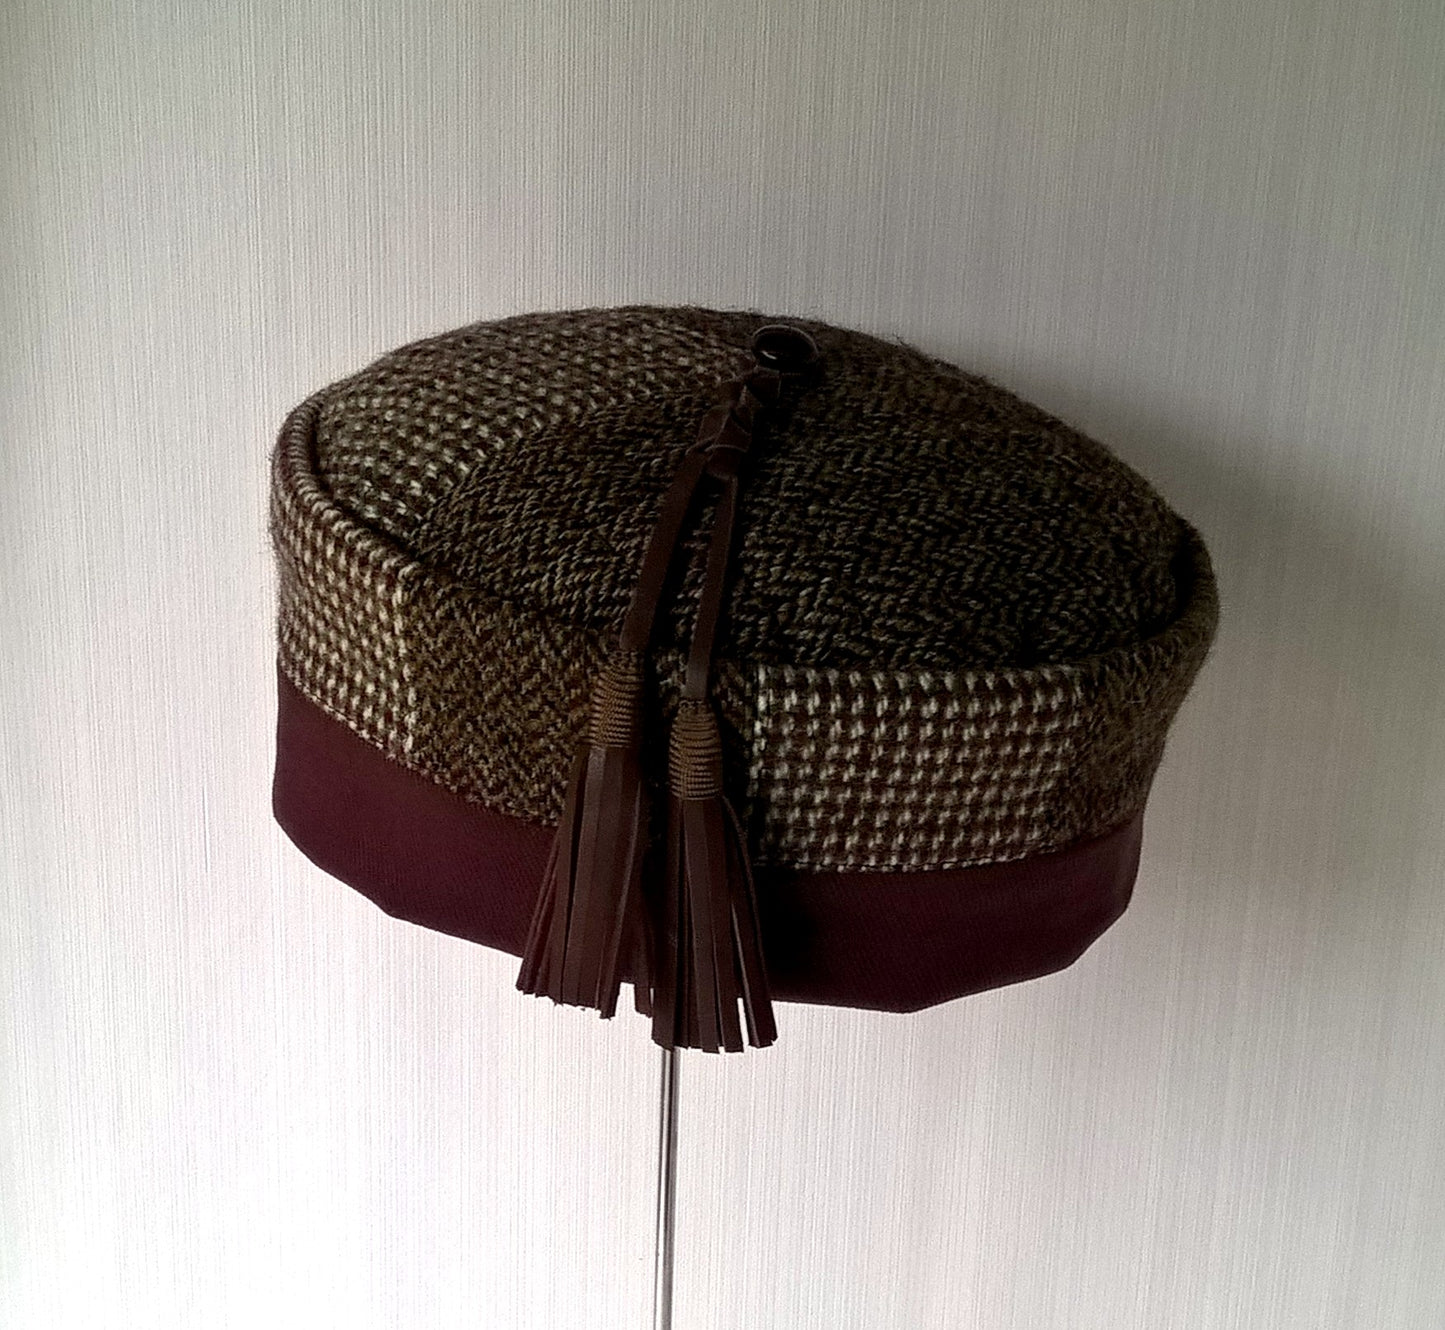 Pillbox shaped hat from Harris tweed wool complimented with brushed cotton  for comfortable wear